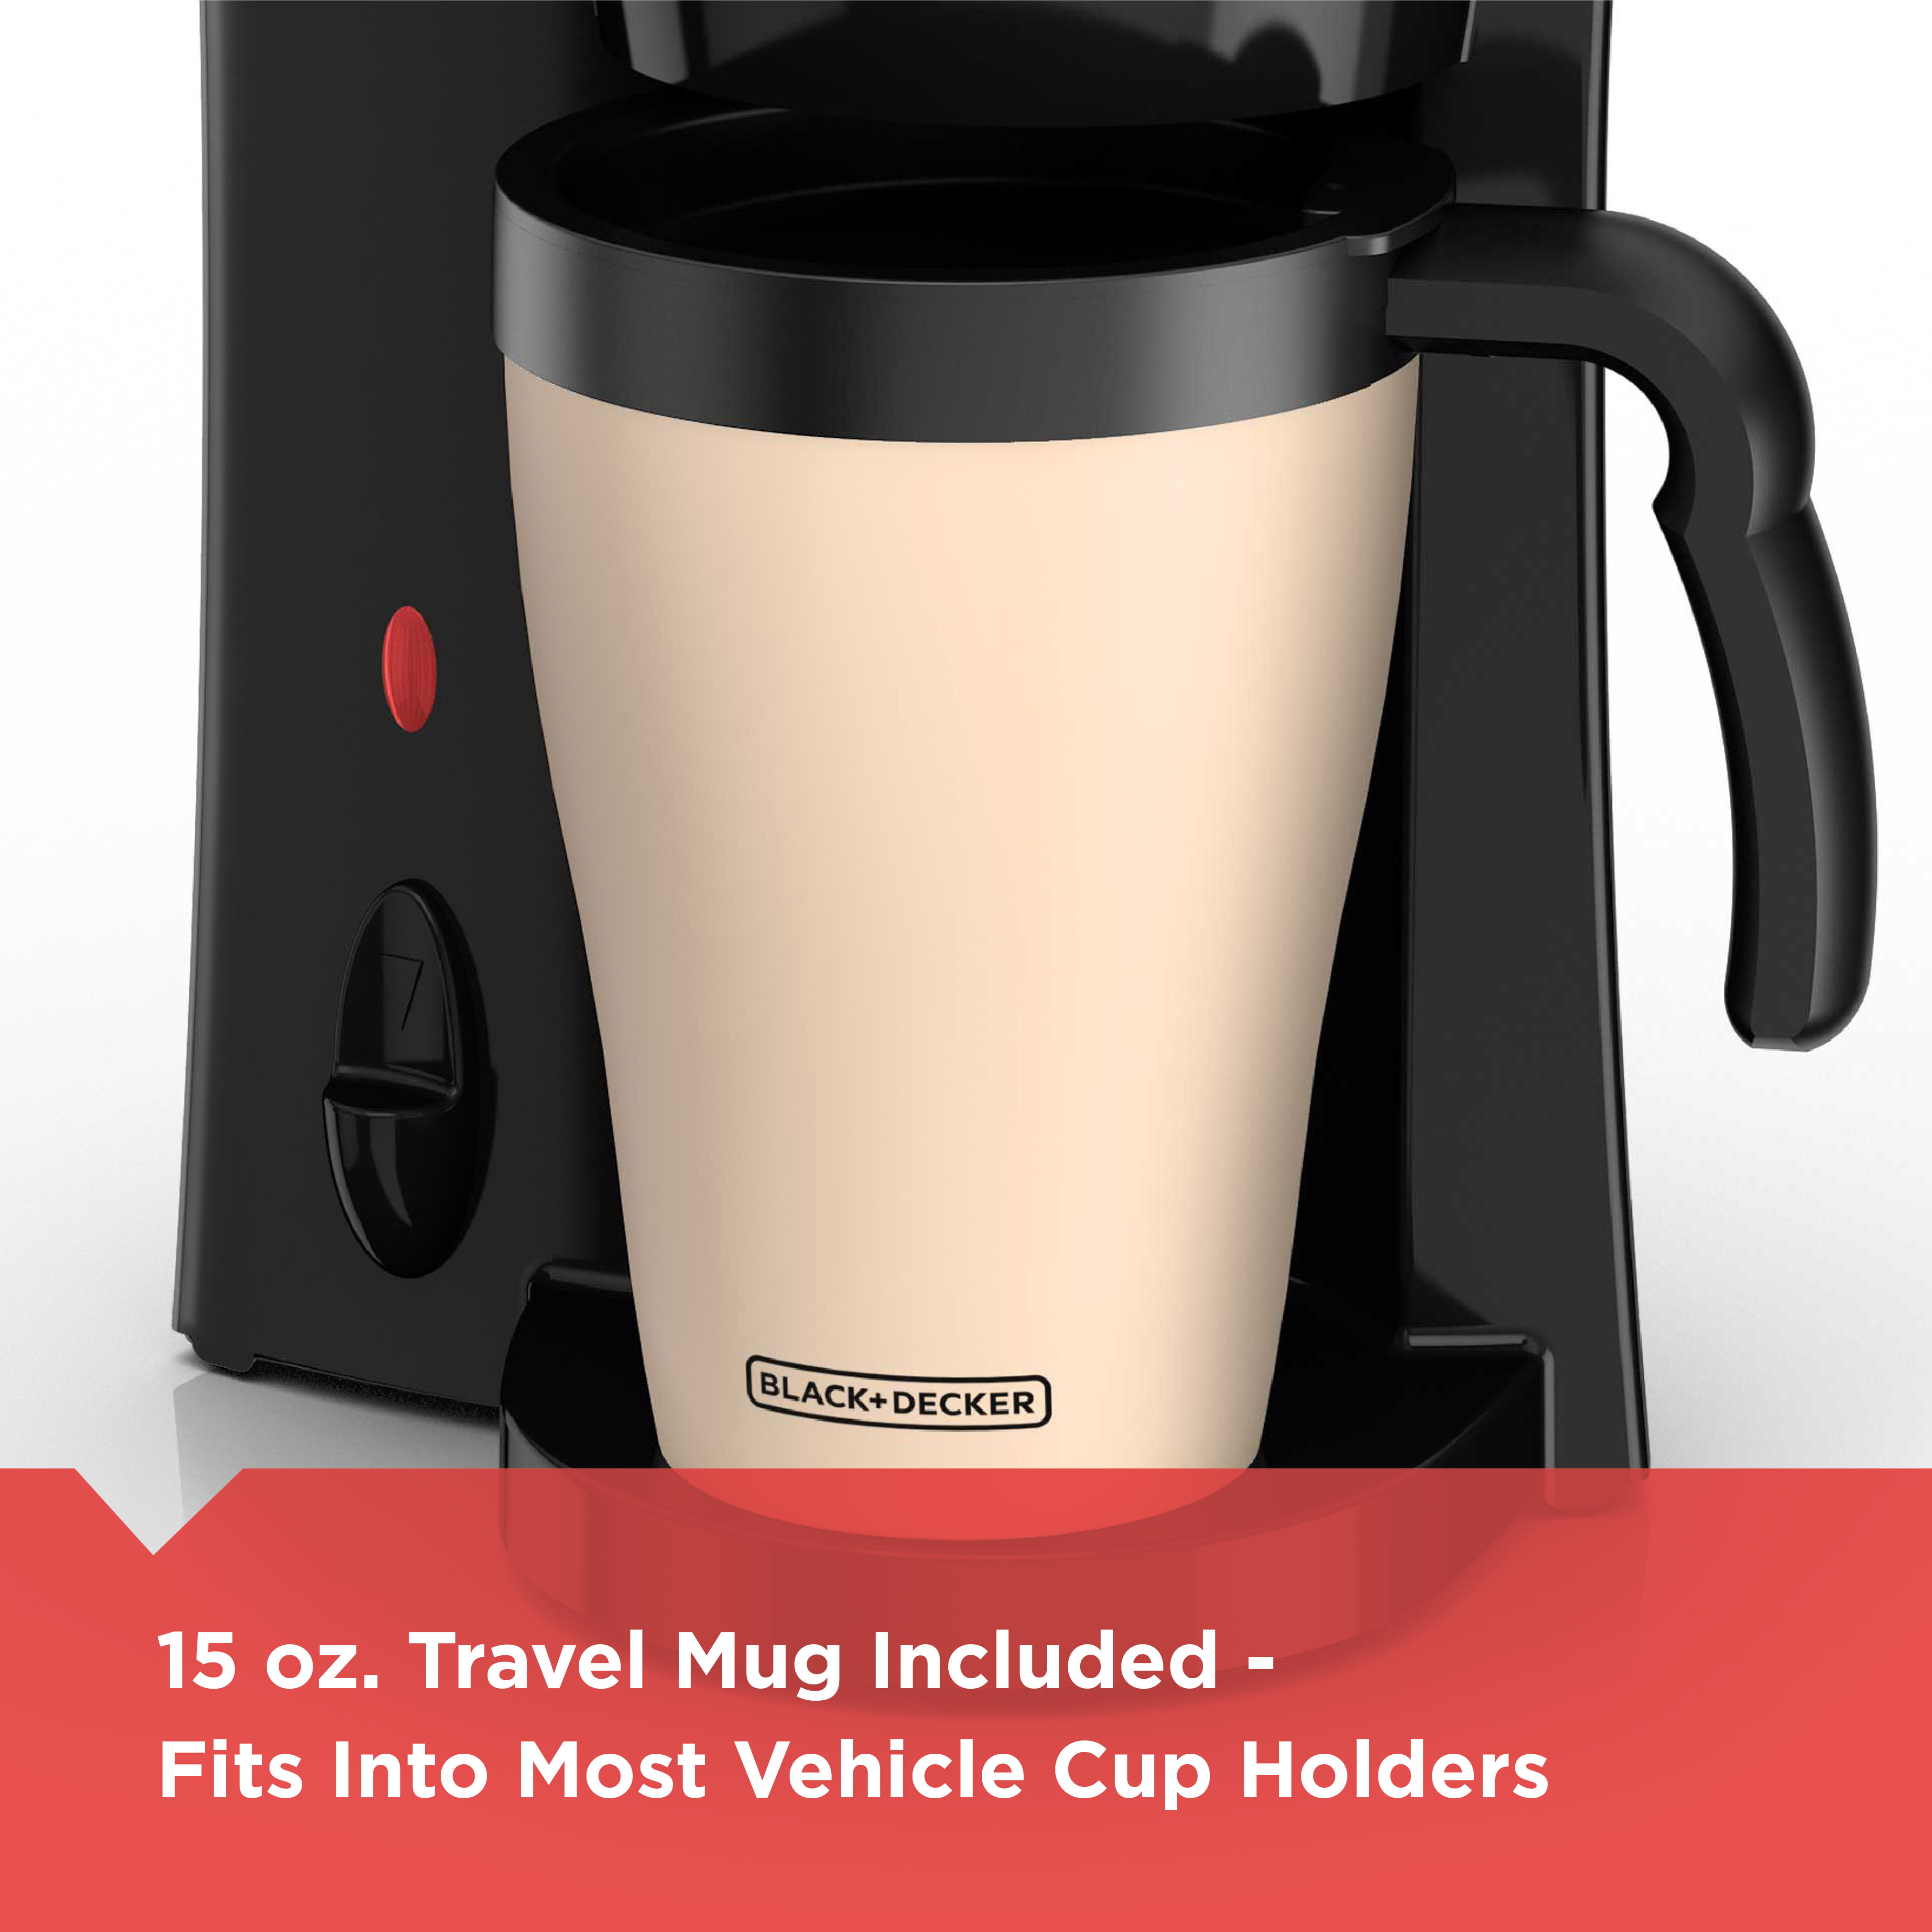 Coffee Maker with Grinder with FREE travel mug – King of boxes USA